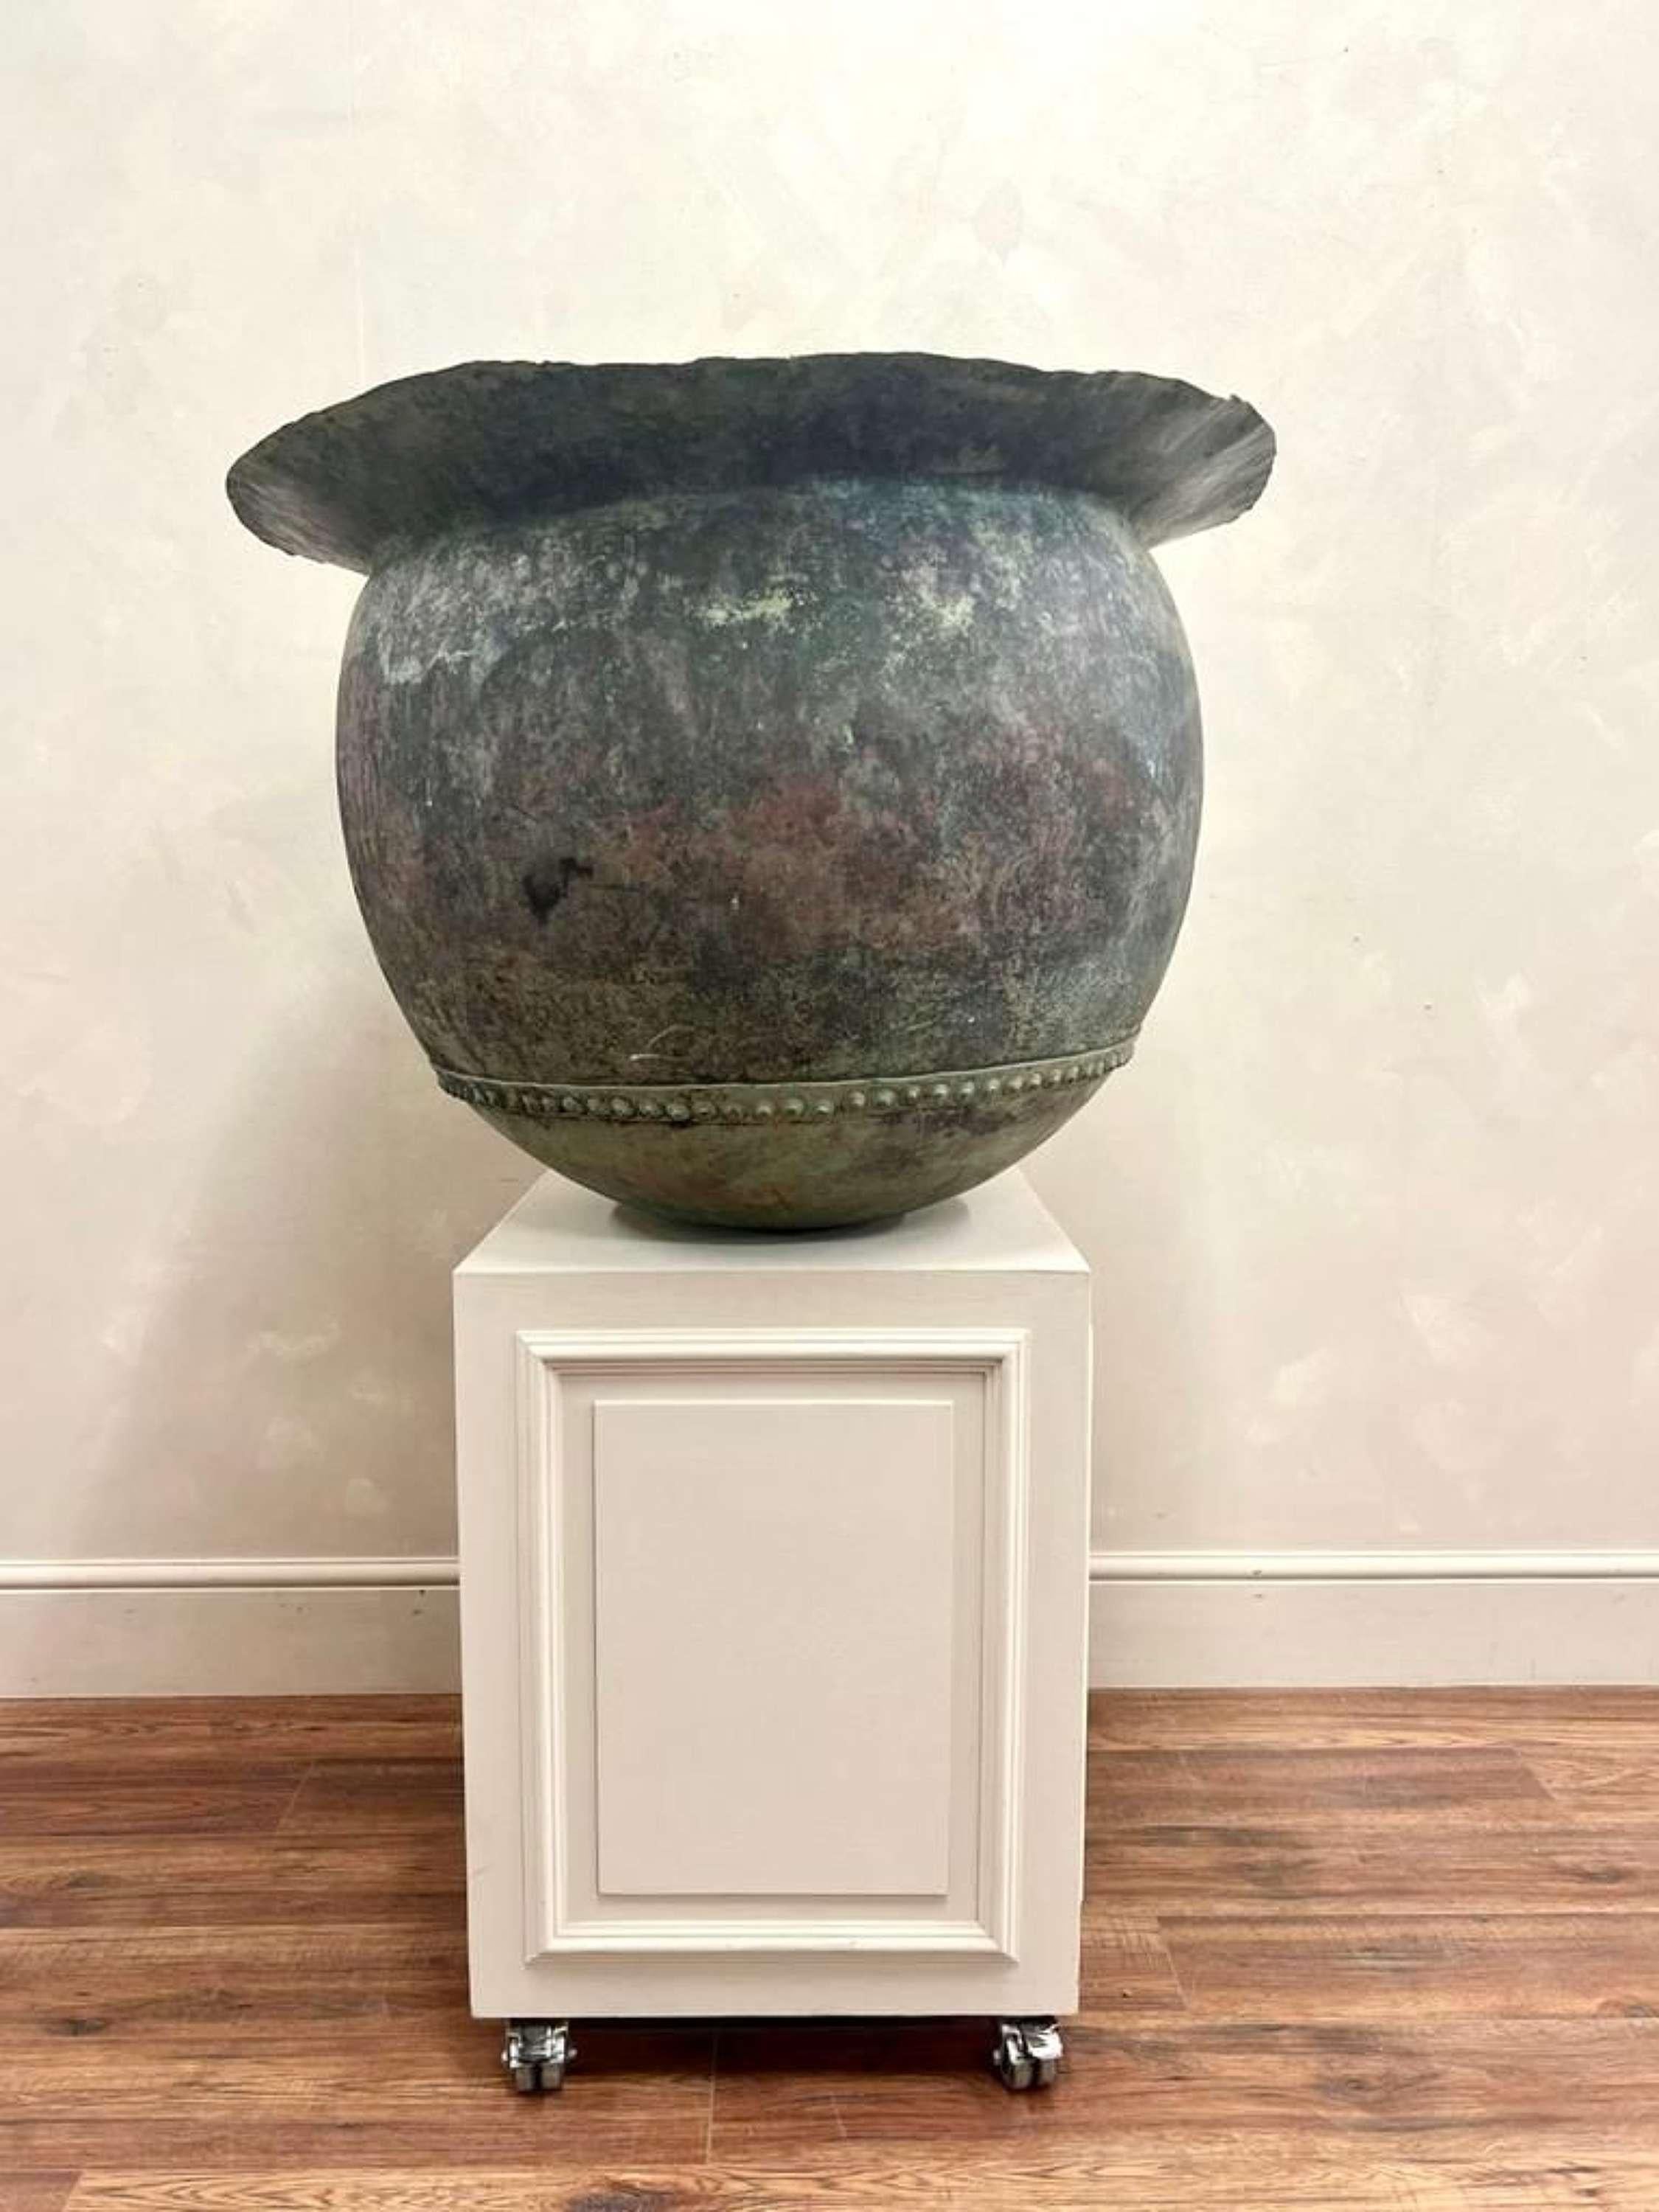 Stunning, huge 19th C Belgian Copper Vat. 
Stamped, dated 1866.
Wonderful natural verdigris and later riveted strap repairs - make do and mend at its finest !!!
Diameter - 86 cm
Height - 63 cm

Bottle shown in images for scale.
Would make an